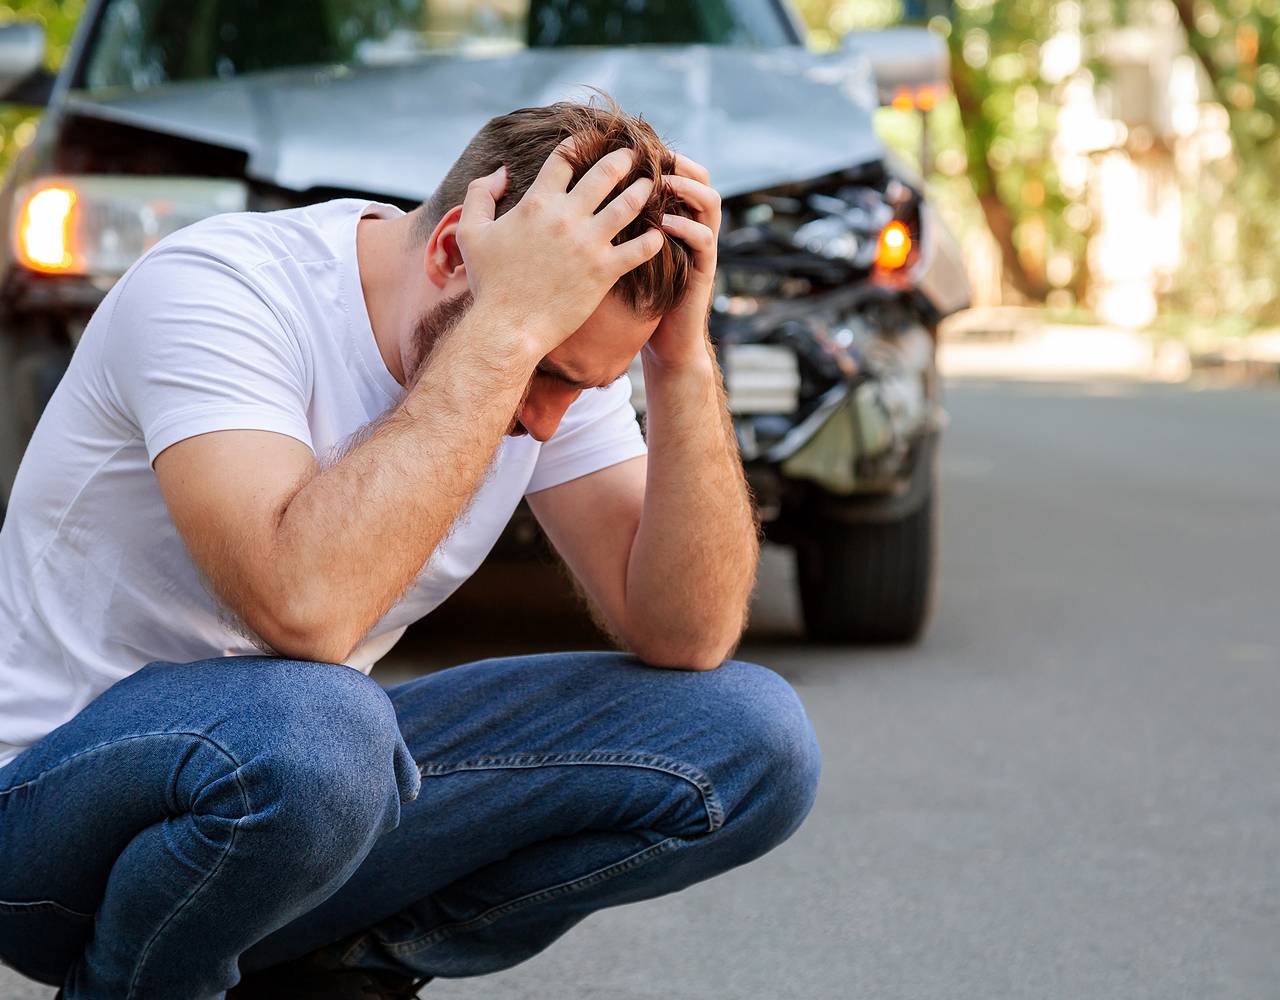 What to do after an accident injury